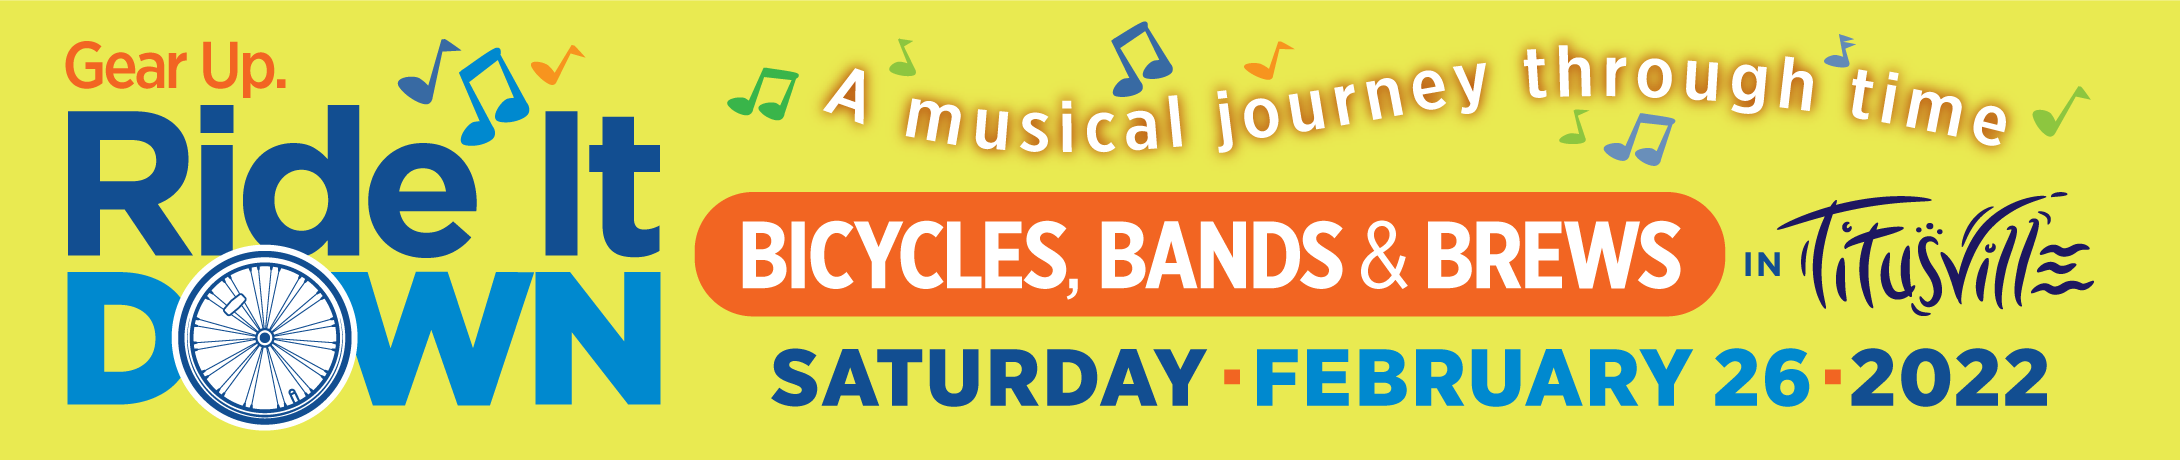 Gear up. Ride it down. A musical journey through time. Bicycles, Bands and Brews in Titusville. Saturday, February 26, 2022.